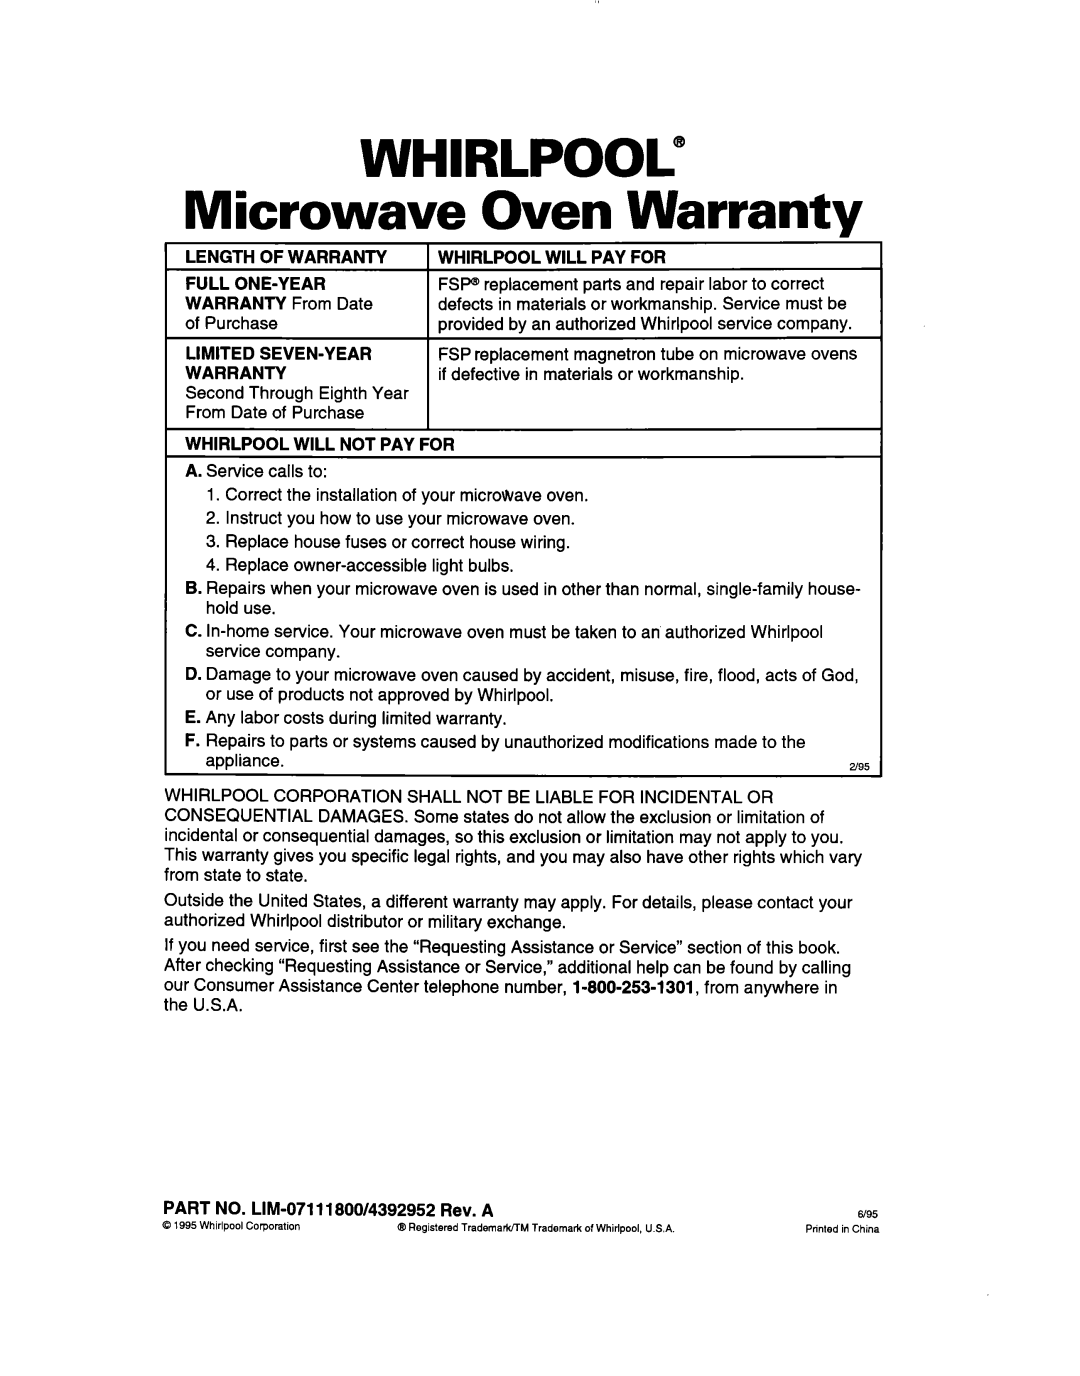 Whirlpool MT7073XD, MT7070XD installation instructions WHIRLPOOL” Microwave Oven Warranty 